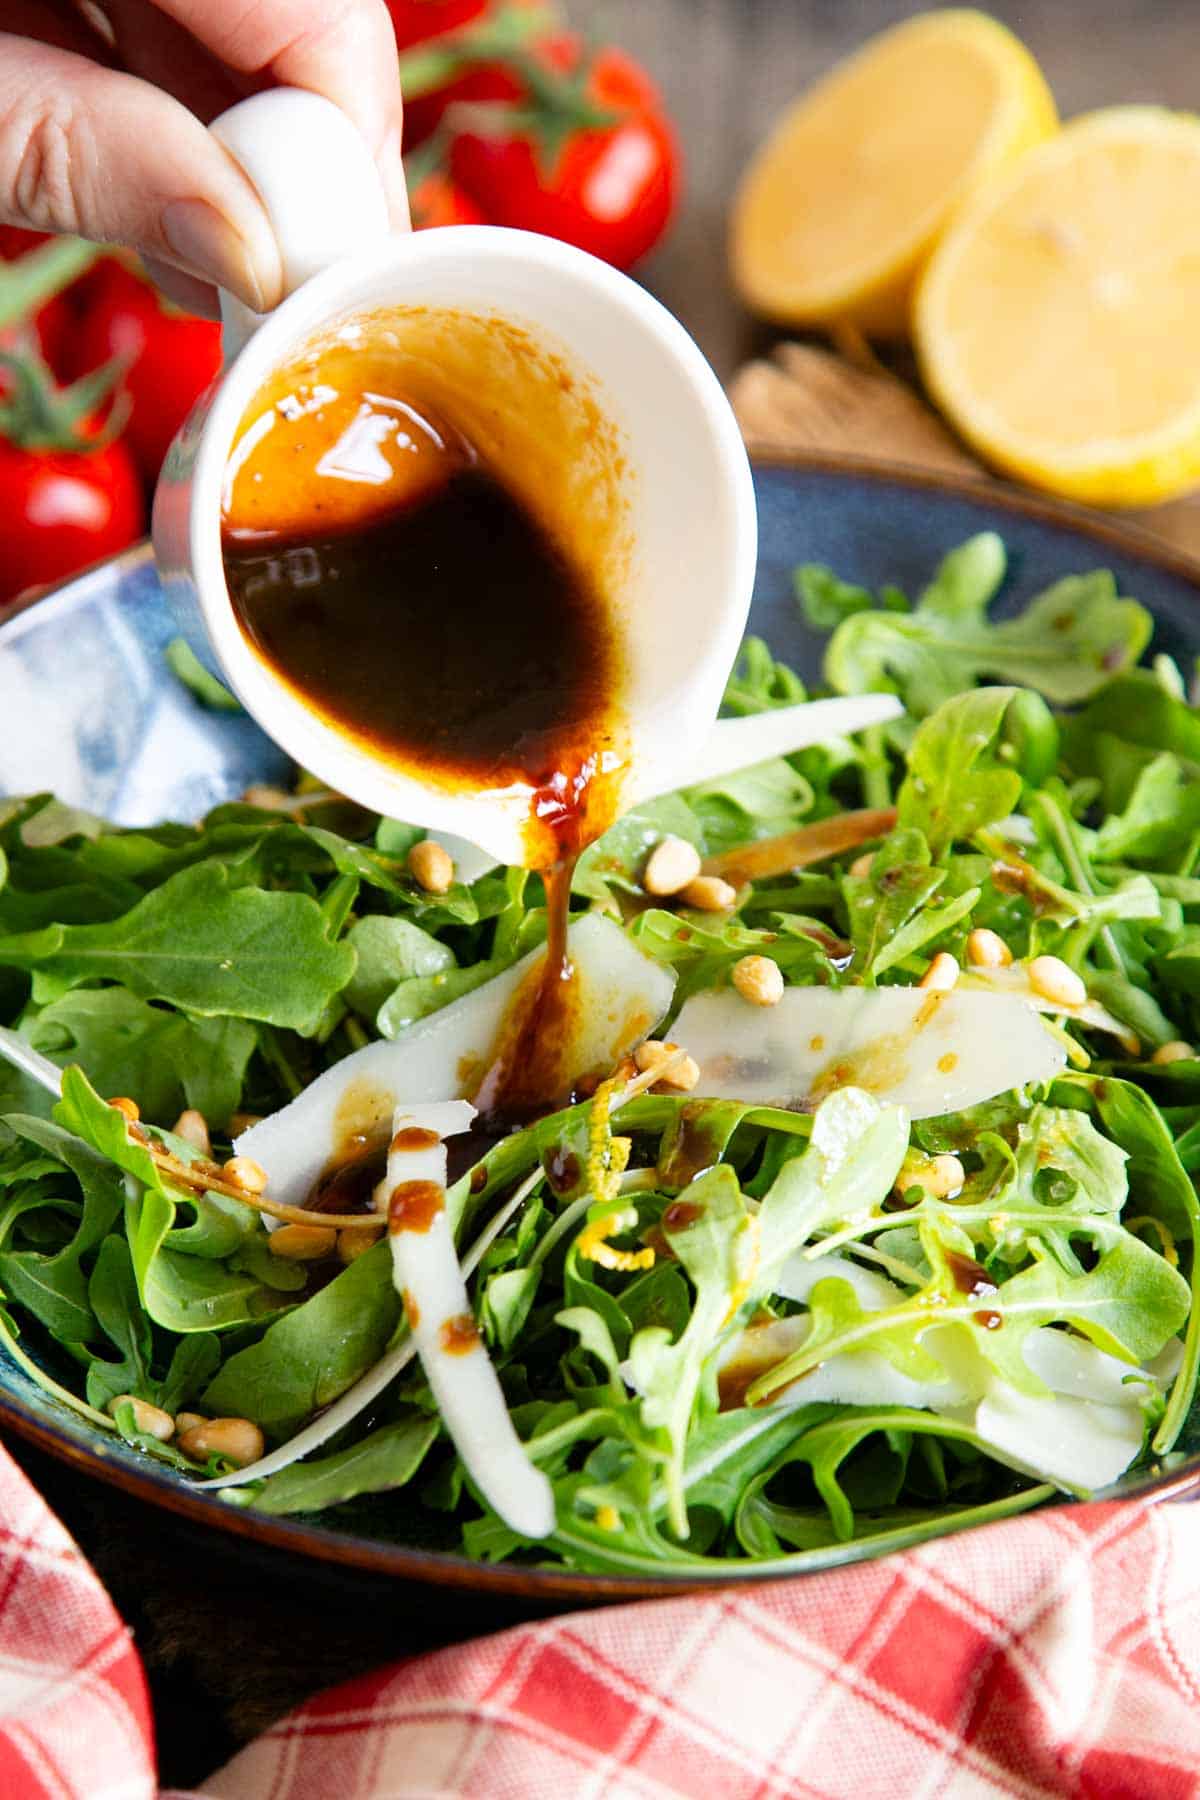 Pouring balsamic dressing from a small jug over a green salad with parmesan shavings.